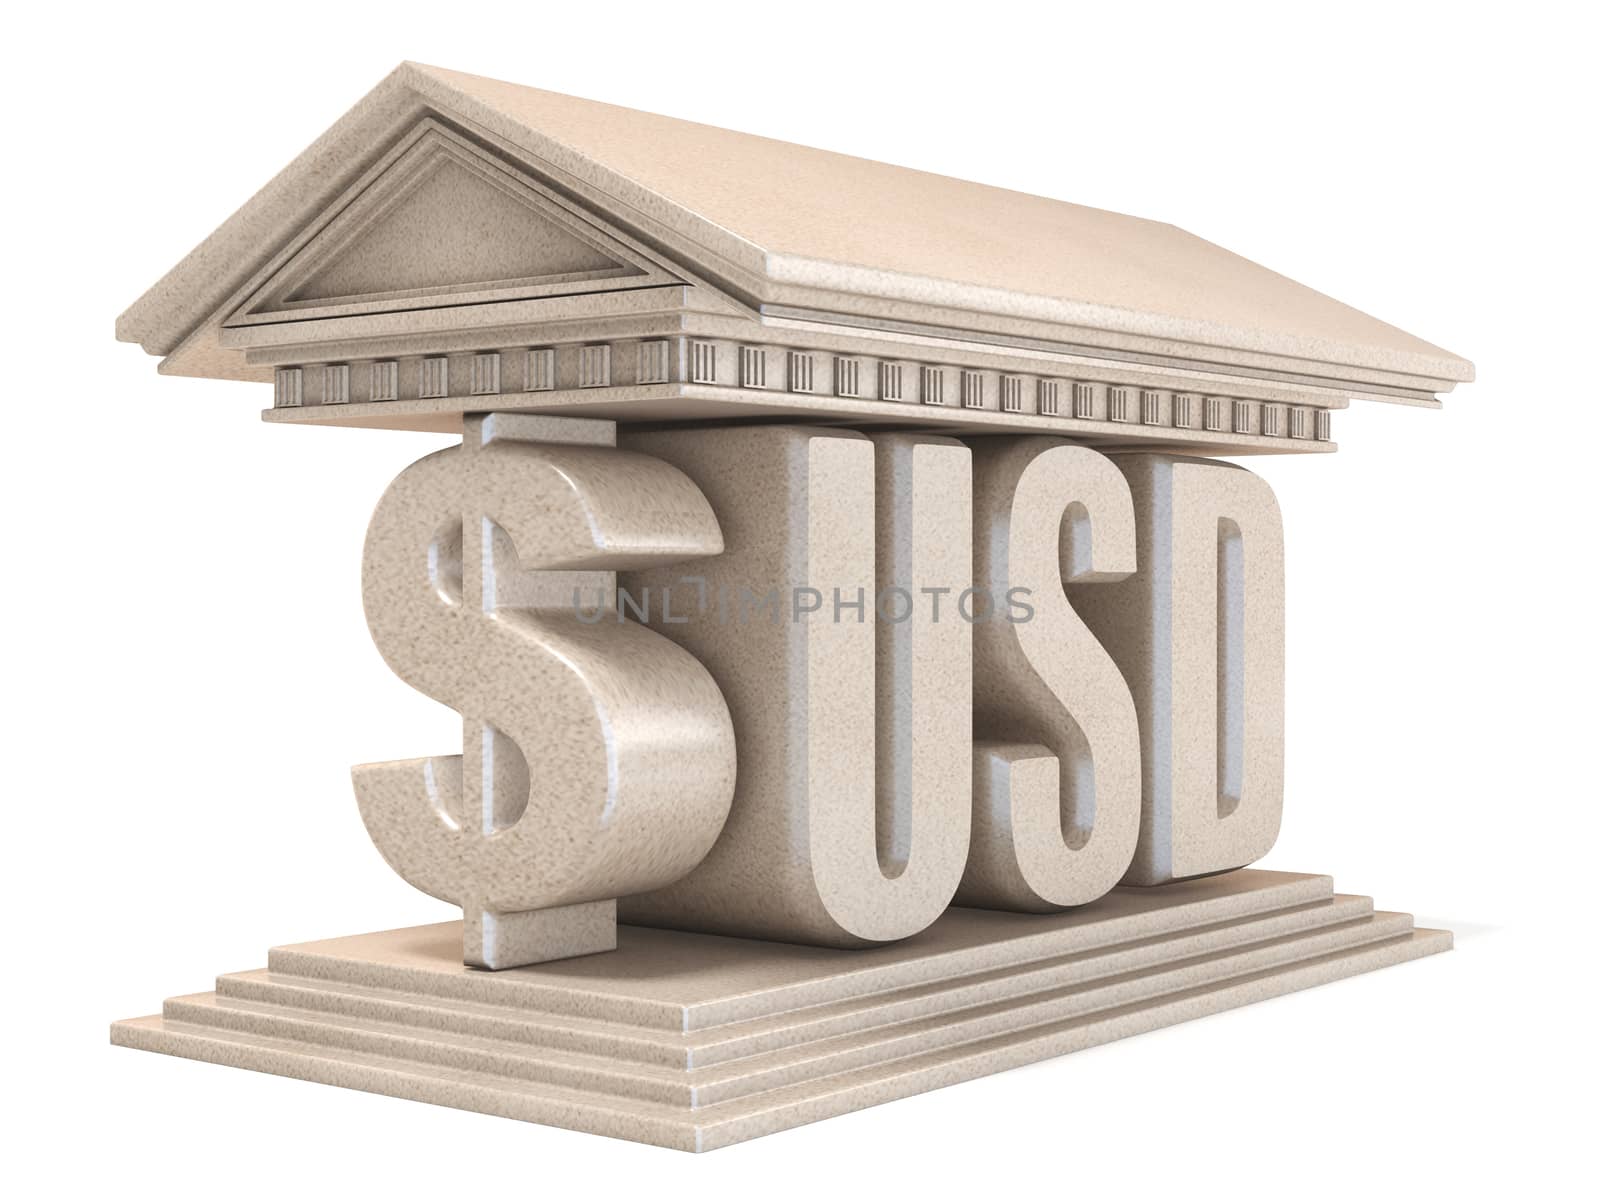 Dollar USD currency sign temple 3D render illustration isolated on white background